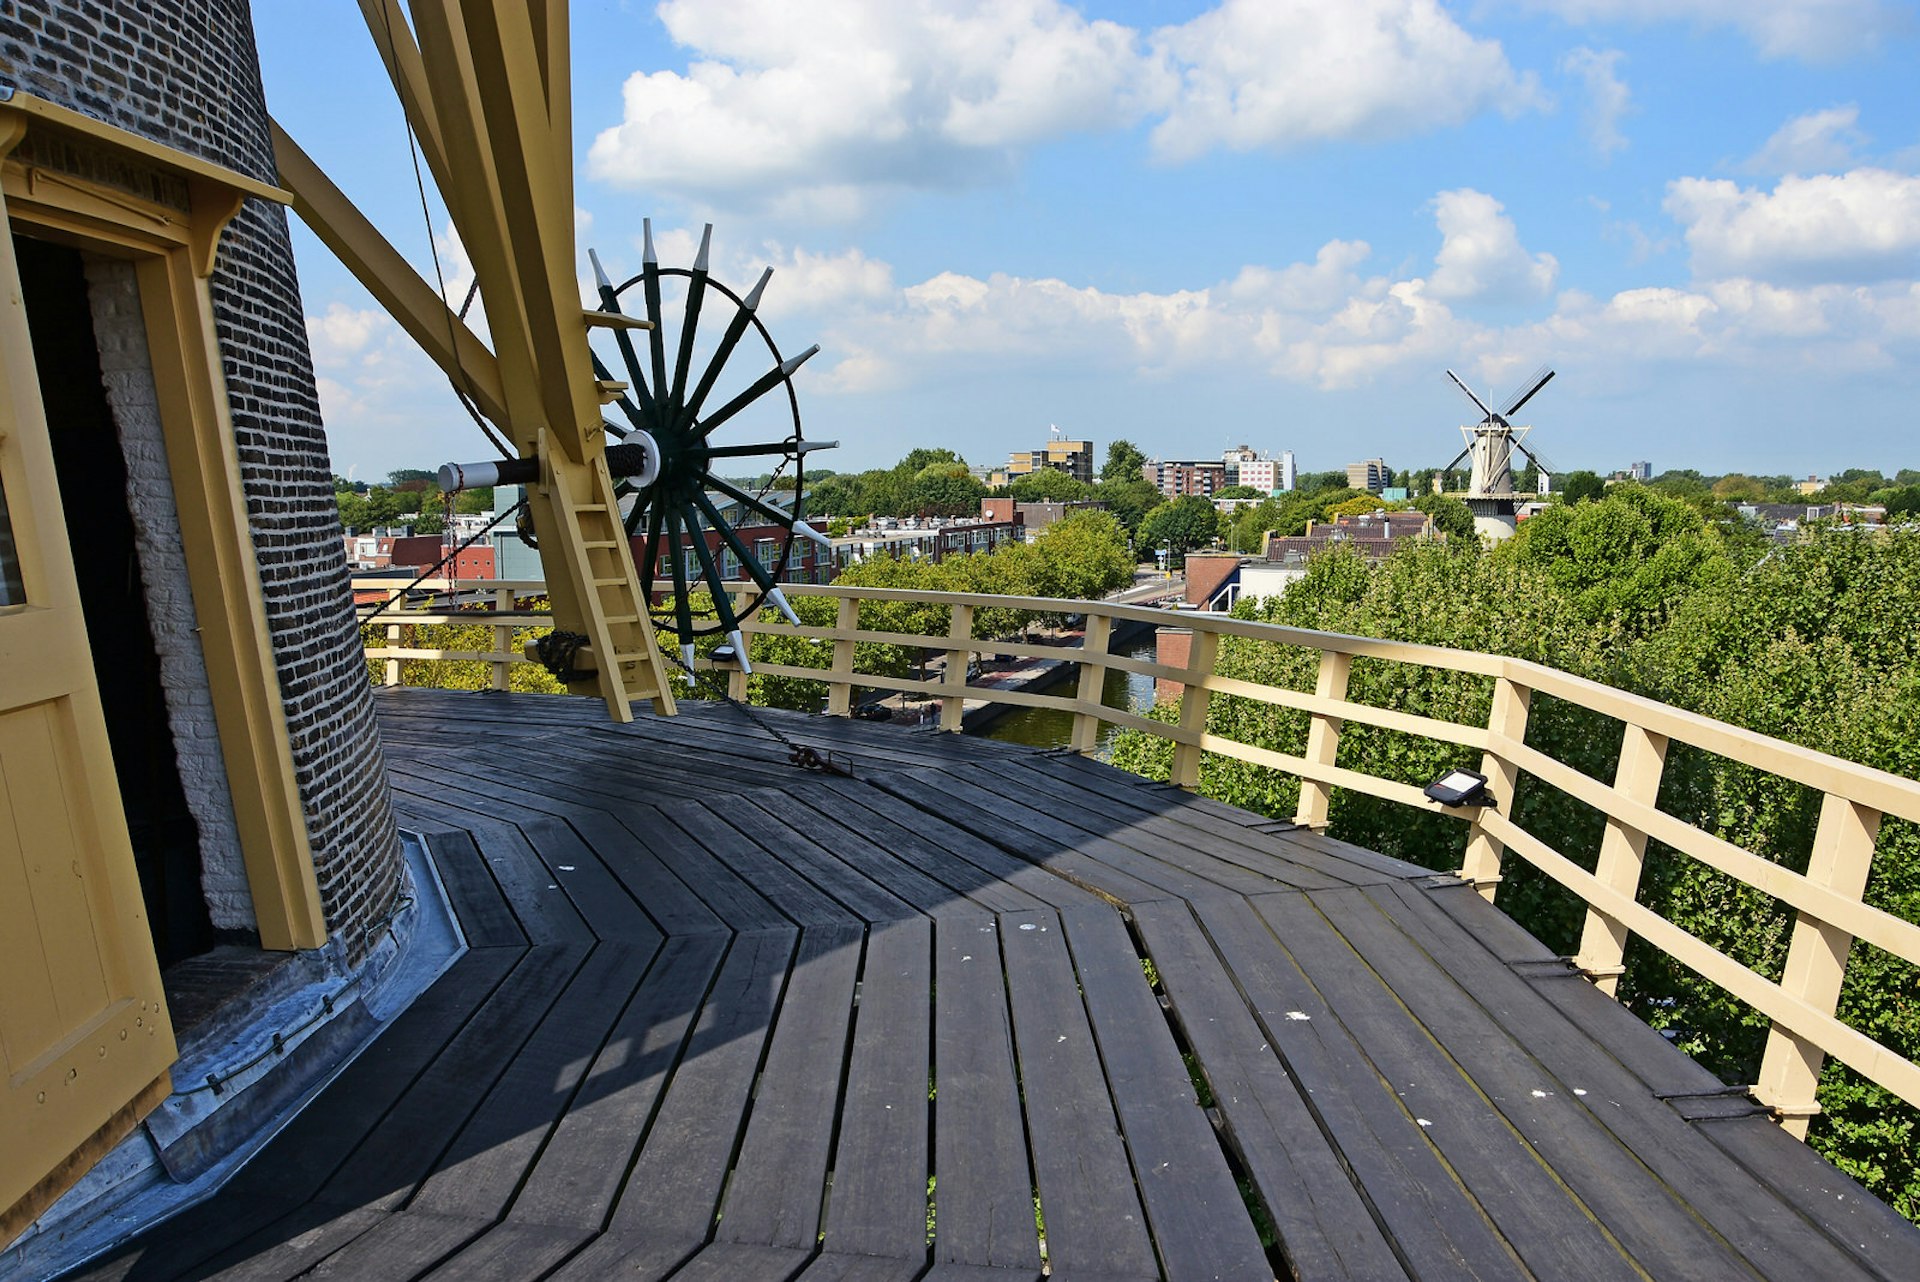 The view from a windmill in Schiedam with trees, houses and a further windmill visible in the distance